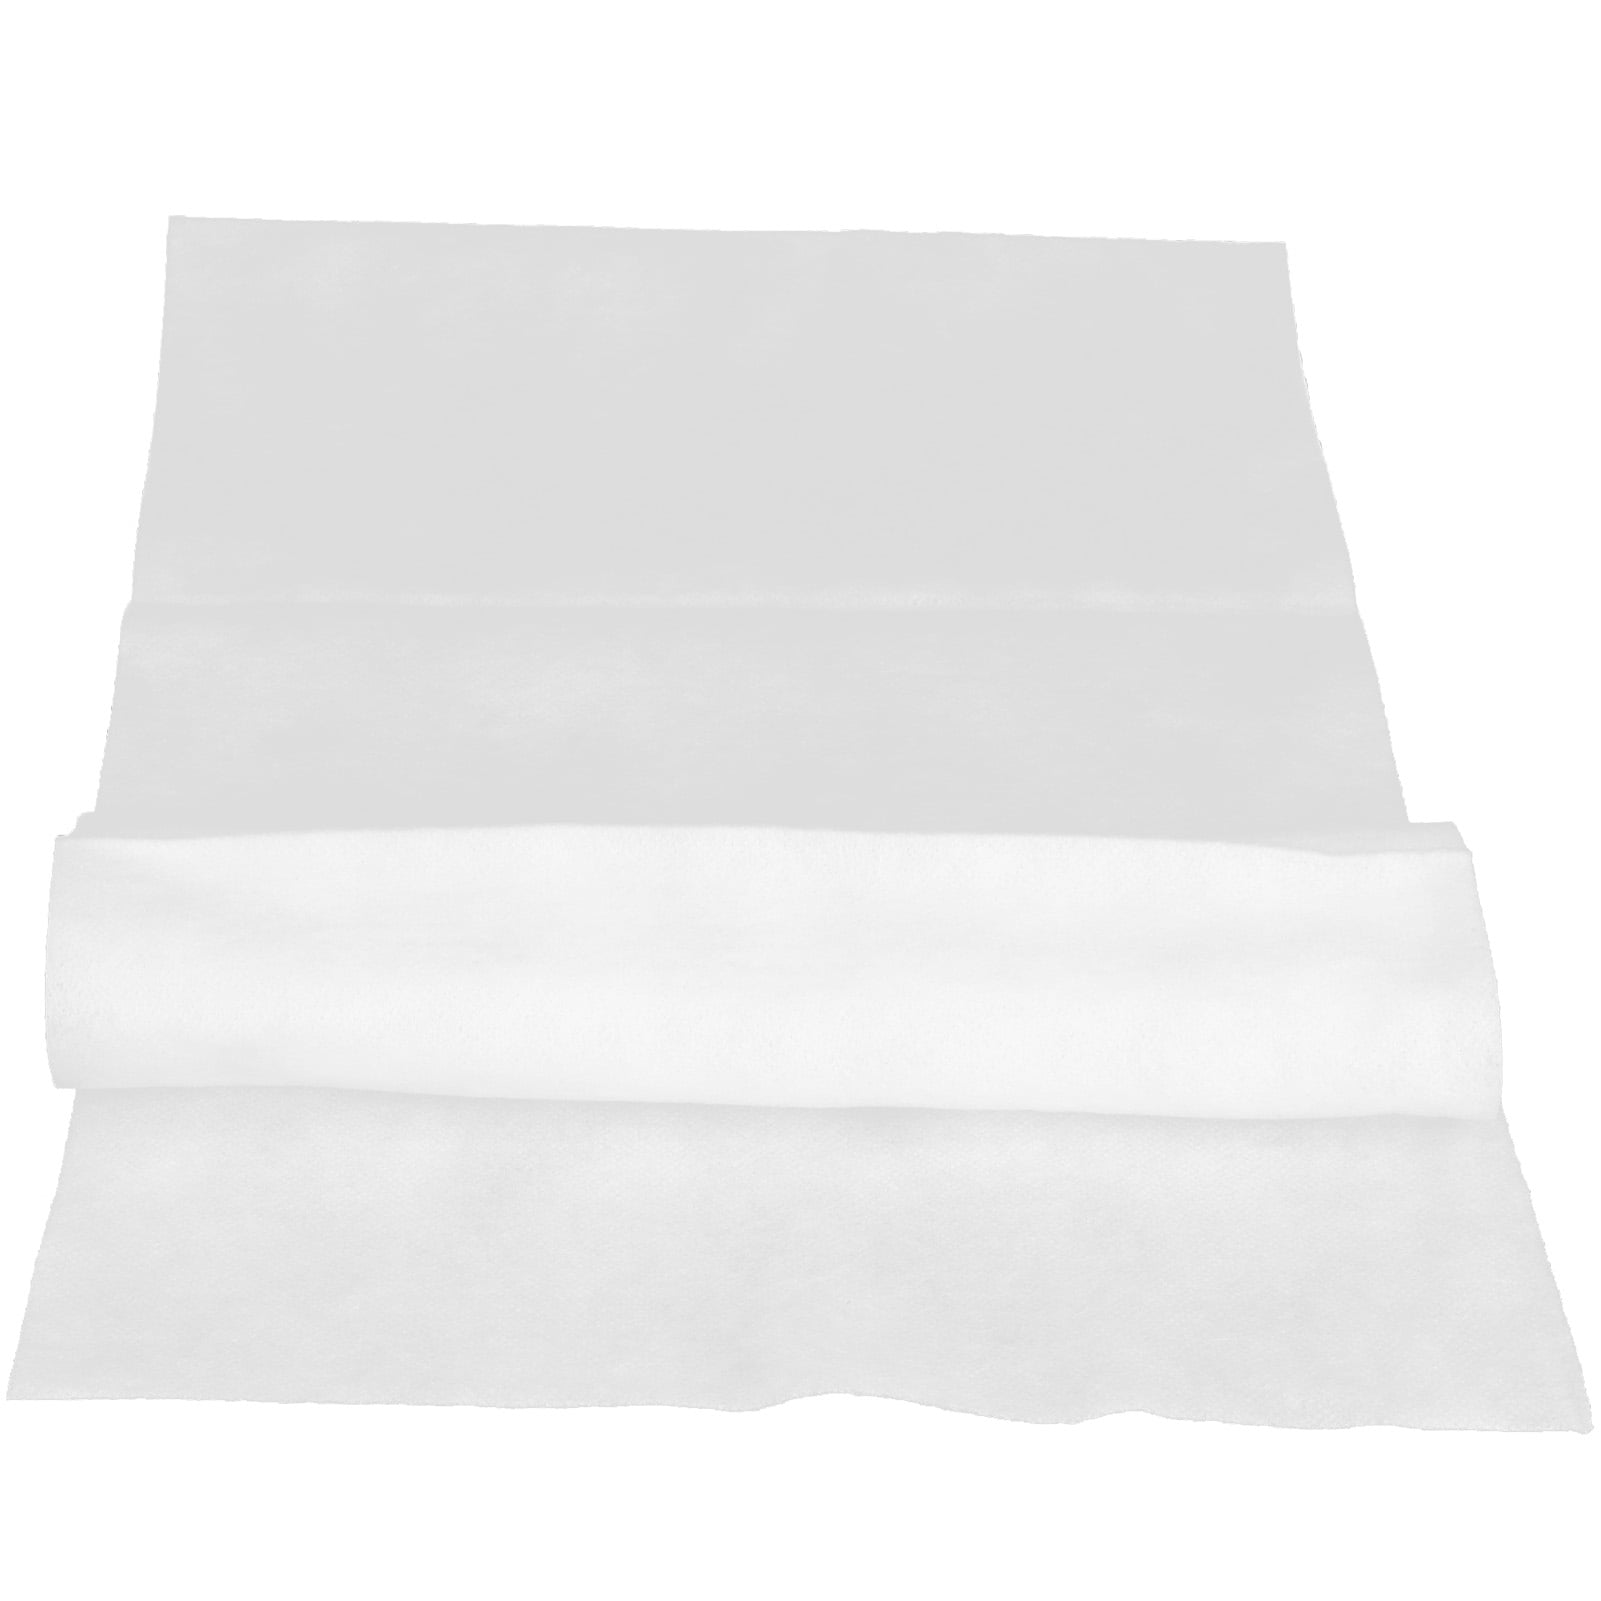 Mgaxyff Filter Cotton Replacement,Electrostatic Filter Cotton Primary ...